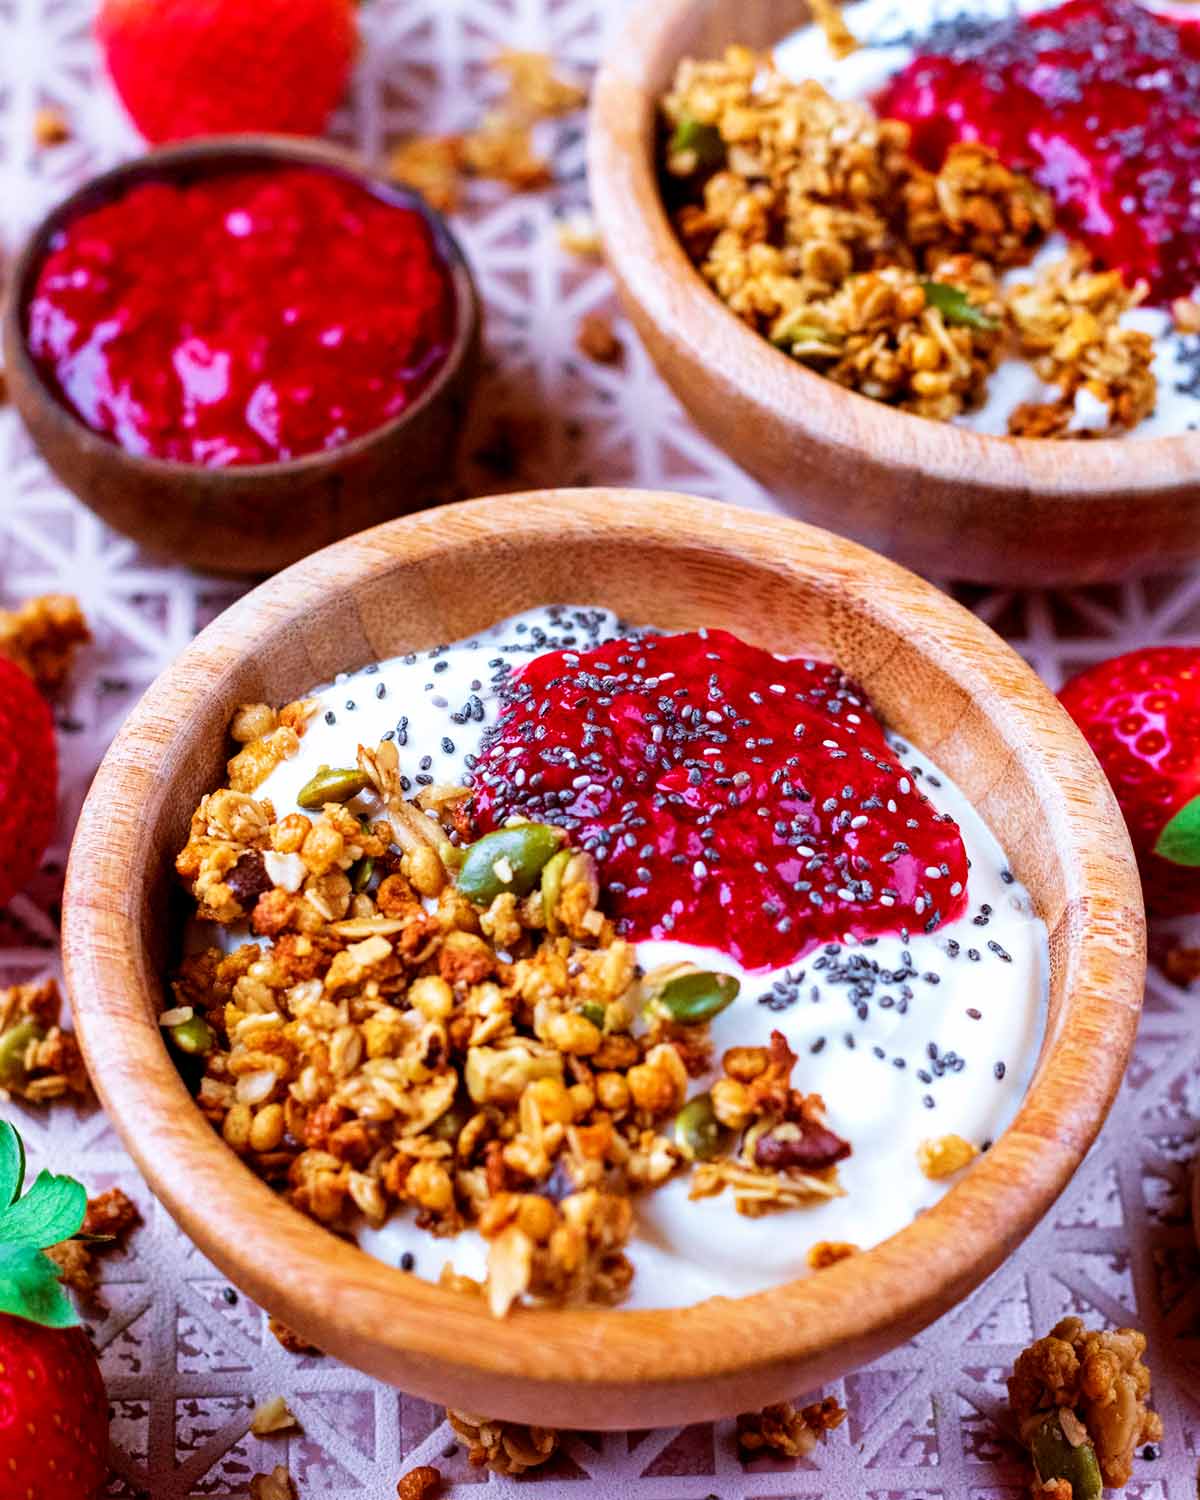 Yogurt, granola and strawberry jelly in a small wooden bowl, topped with chia seeds.